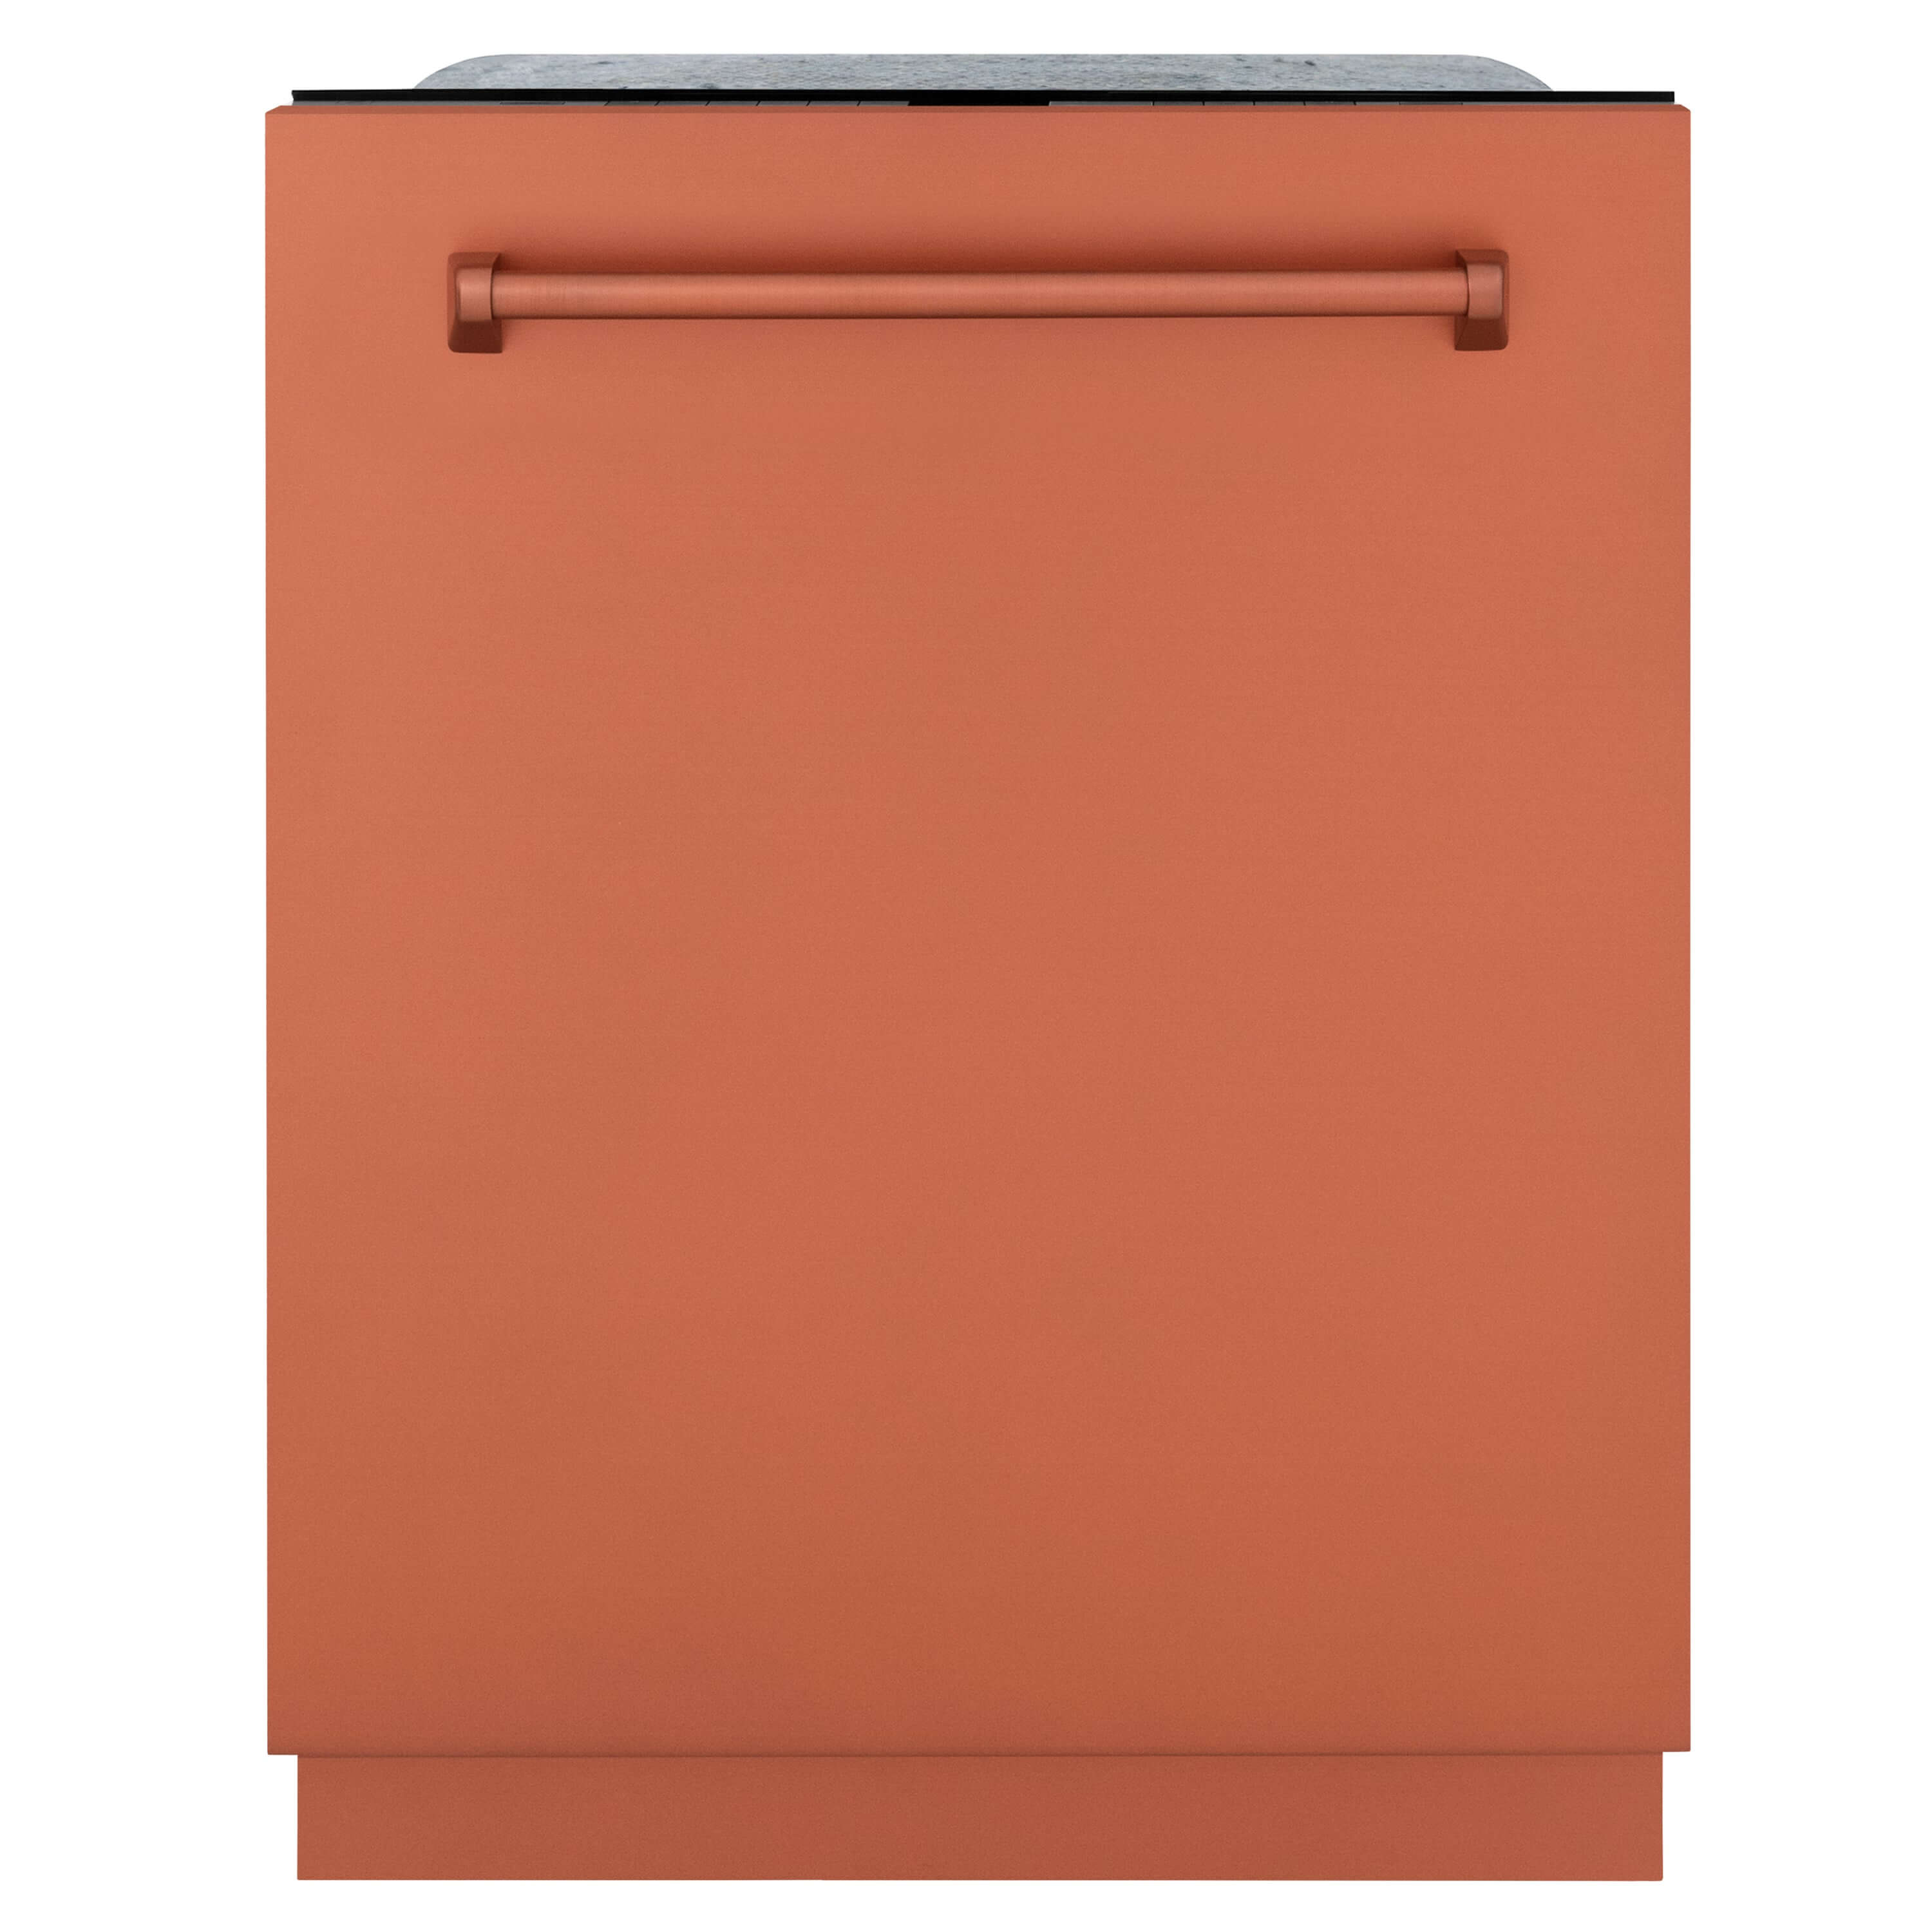 ZLINE 24 in. Monument Dishwasher with Copper Panel (DWMT-C-24) Front View